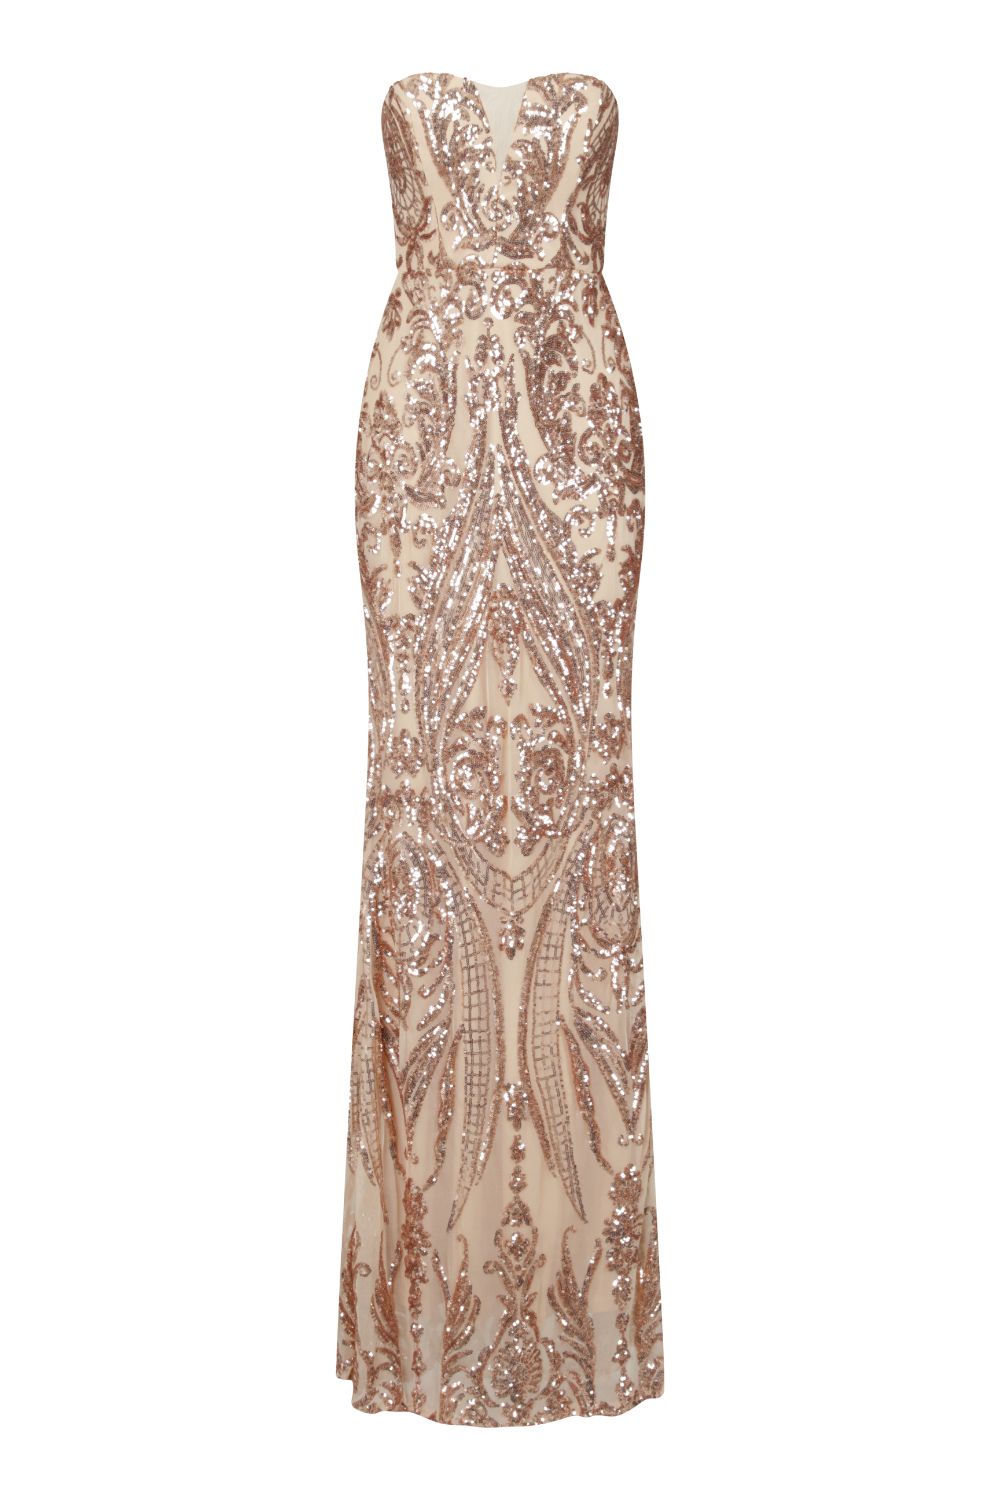 Kingdom Gold Luxe Sweetheart Mesh Plunge Sequin Fishtail Maxi Dress